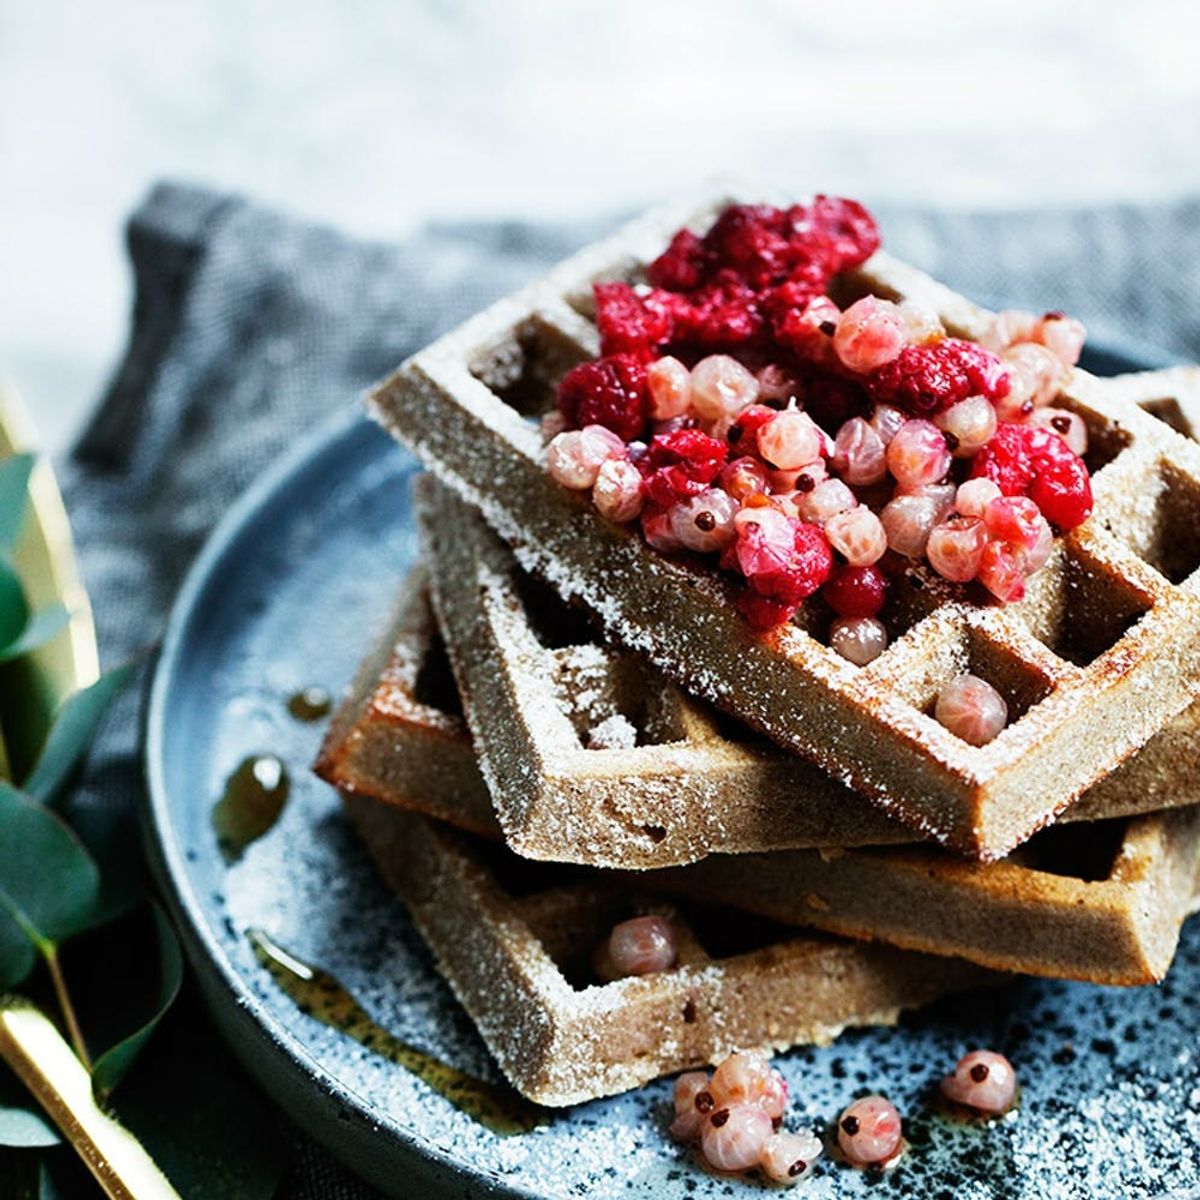 26 Reasons to Bust Out the Waffle Maker Today